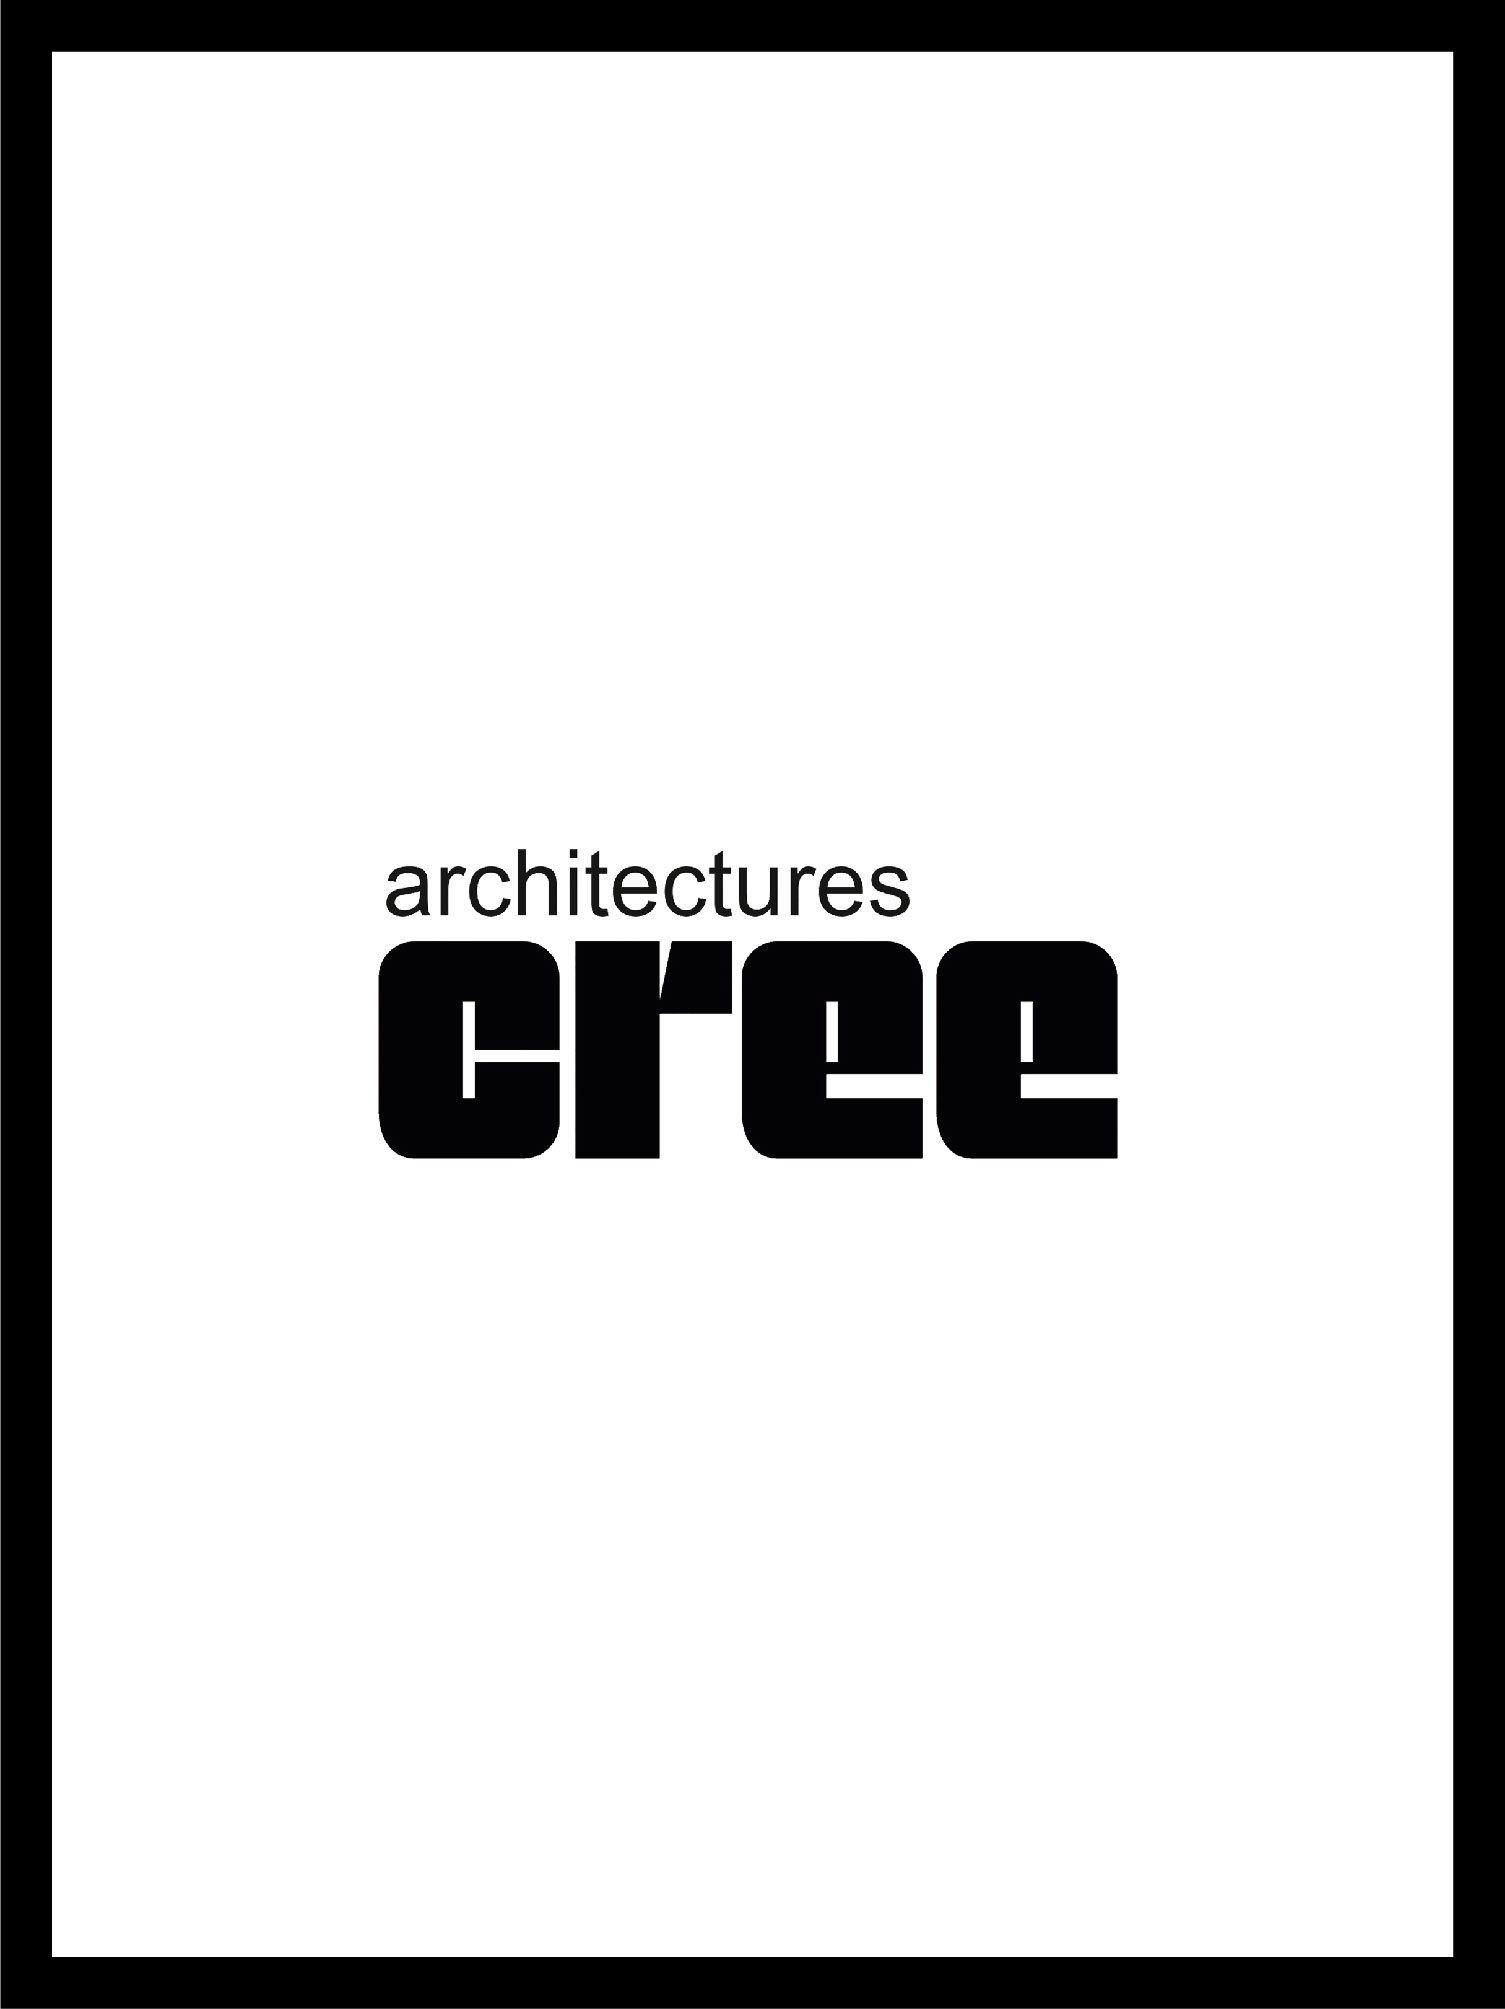 logo of the magazine architectures cree march 2021